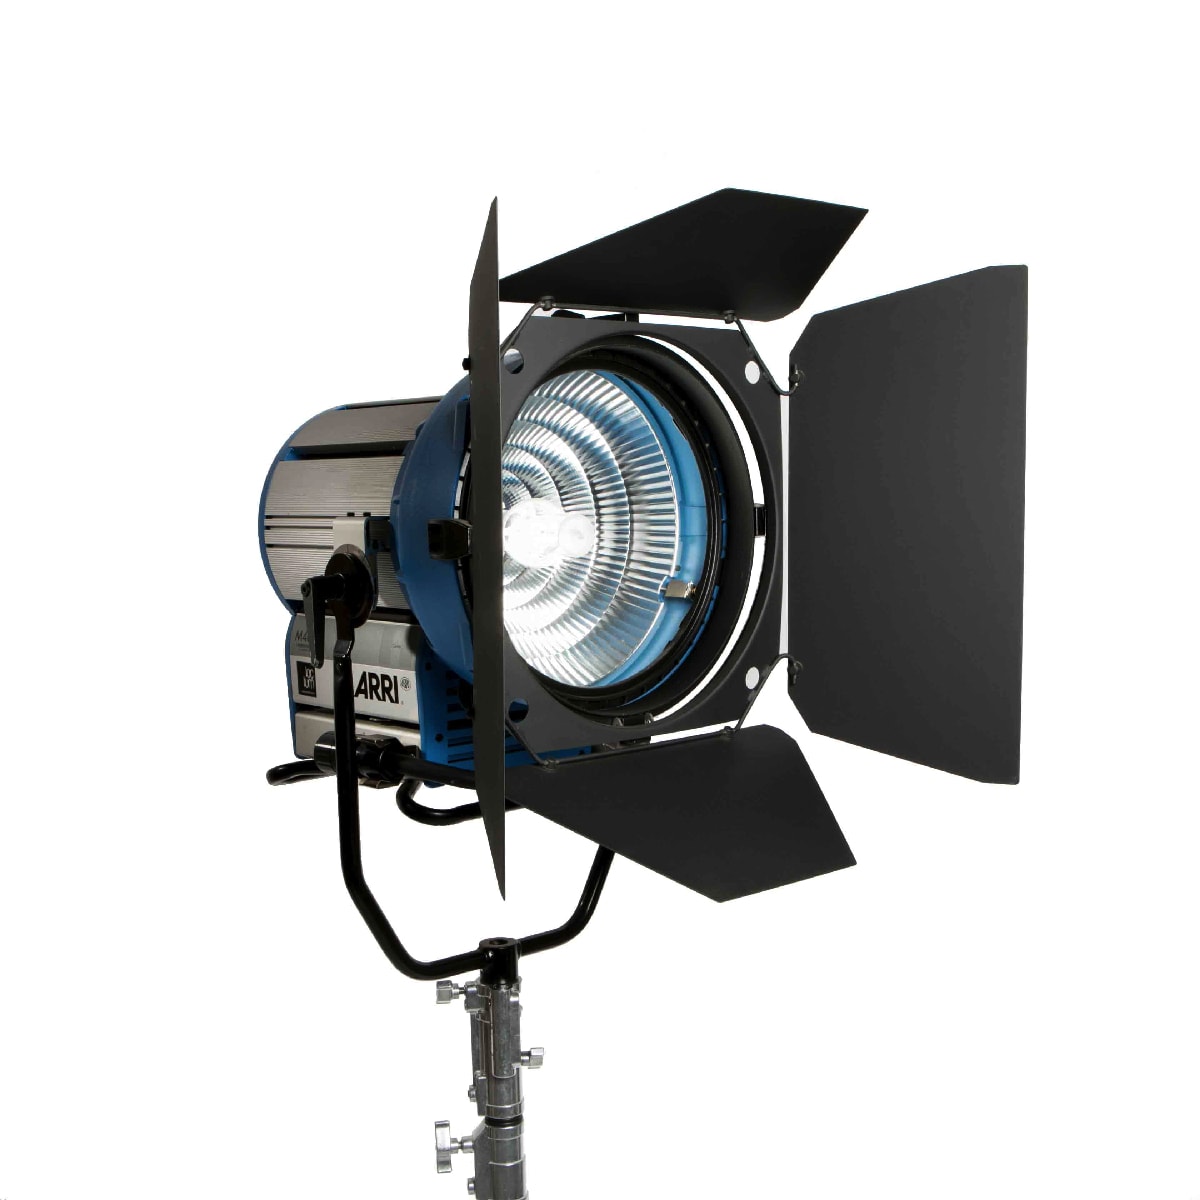 ARRI M40/25 Open Face with Facetted Reflector